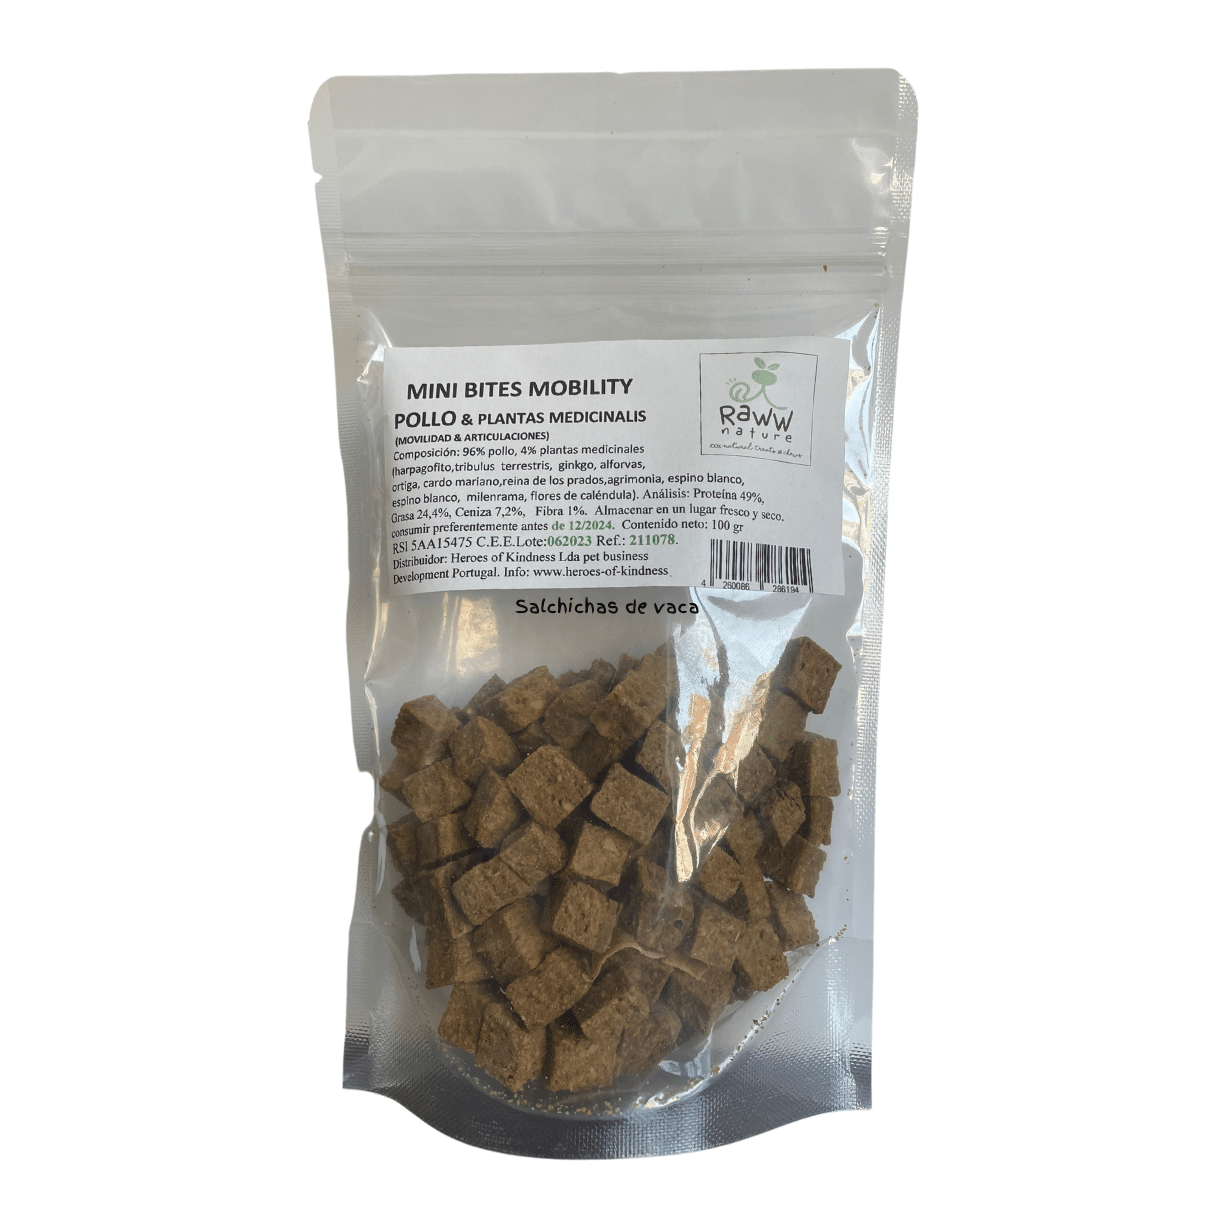 Mini mobility bites are natural chicken snacks with medicinal plants that support mobility and joint problems